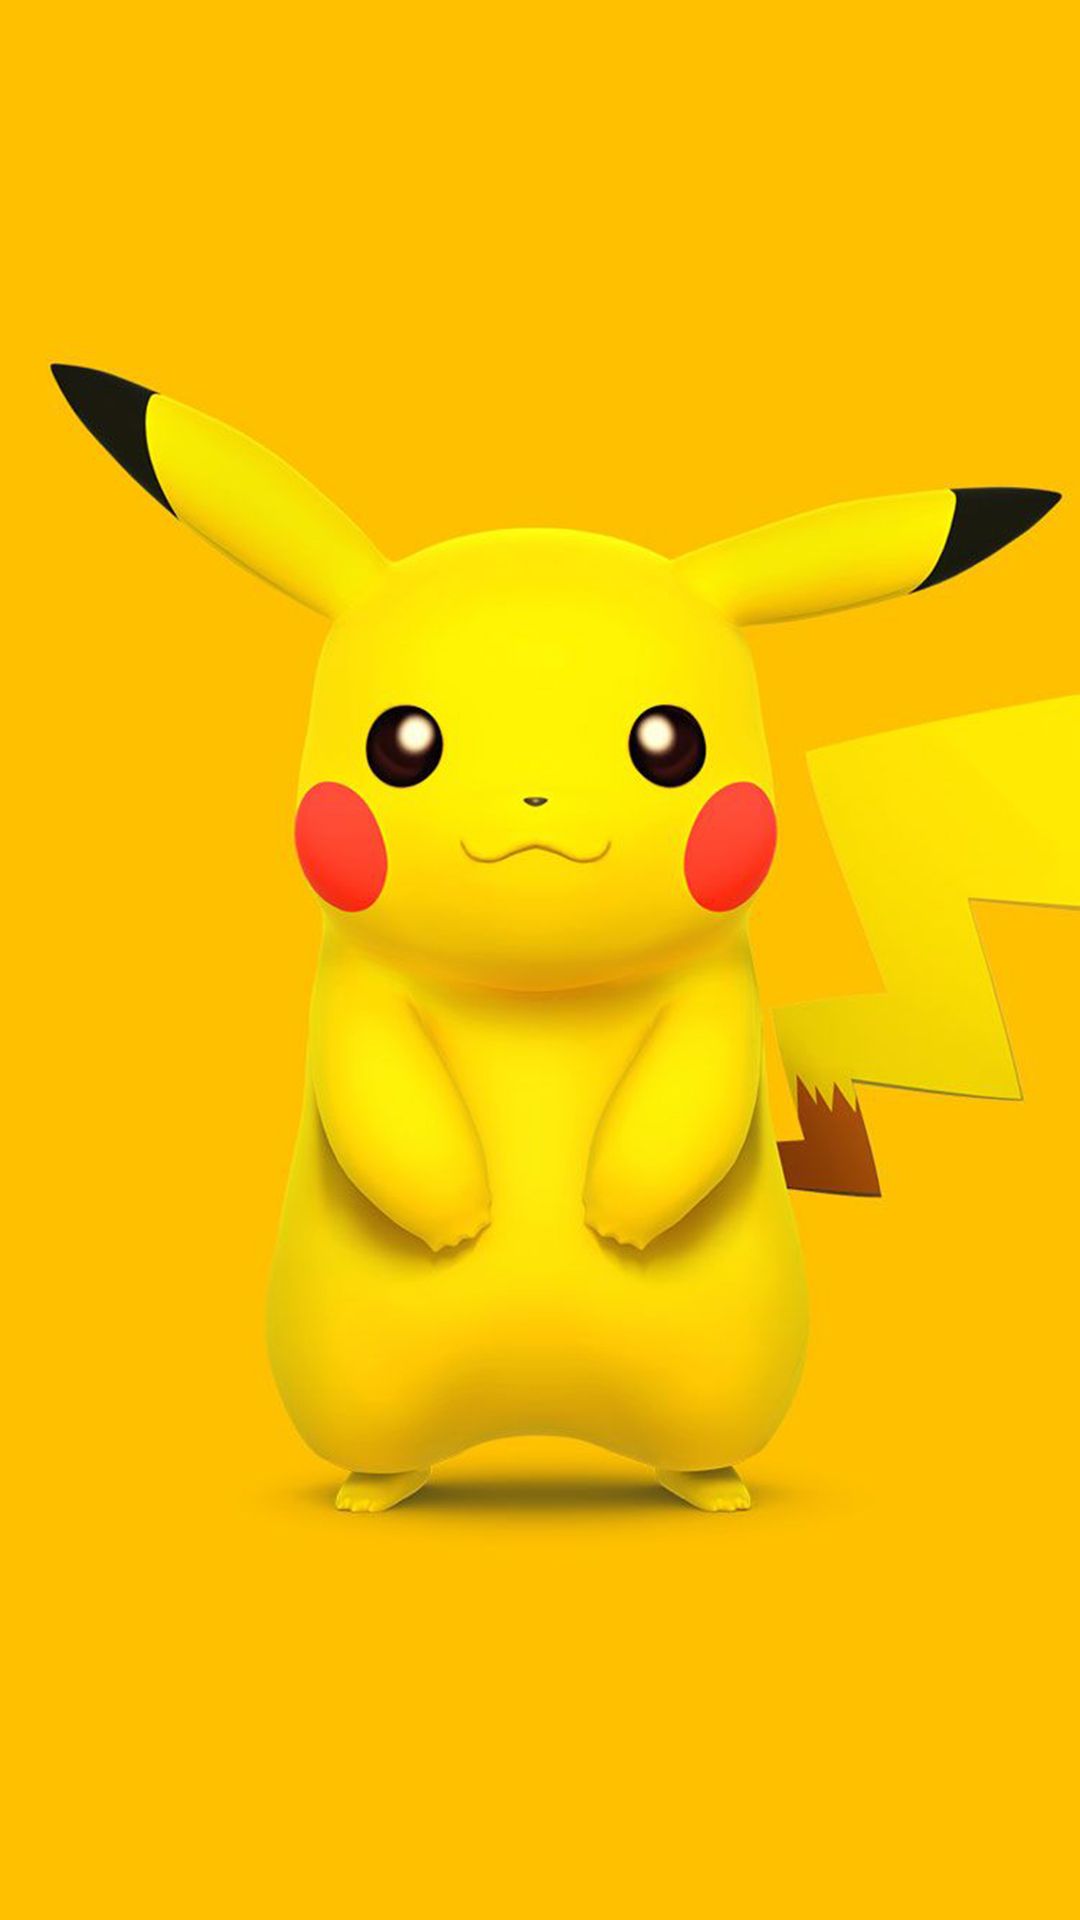 Pokemon iPhone Wallpaper with high-resolution 1080x1920 pixel. You can use this wallpaper for your iPhone 5, 6, 7, 8, X, XS, XR backgrounds, Mobile Screensaver, or iPad Lock Screen - Pokemon, Pikachu